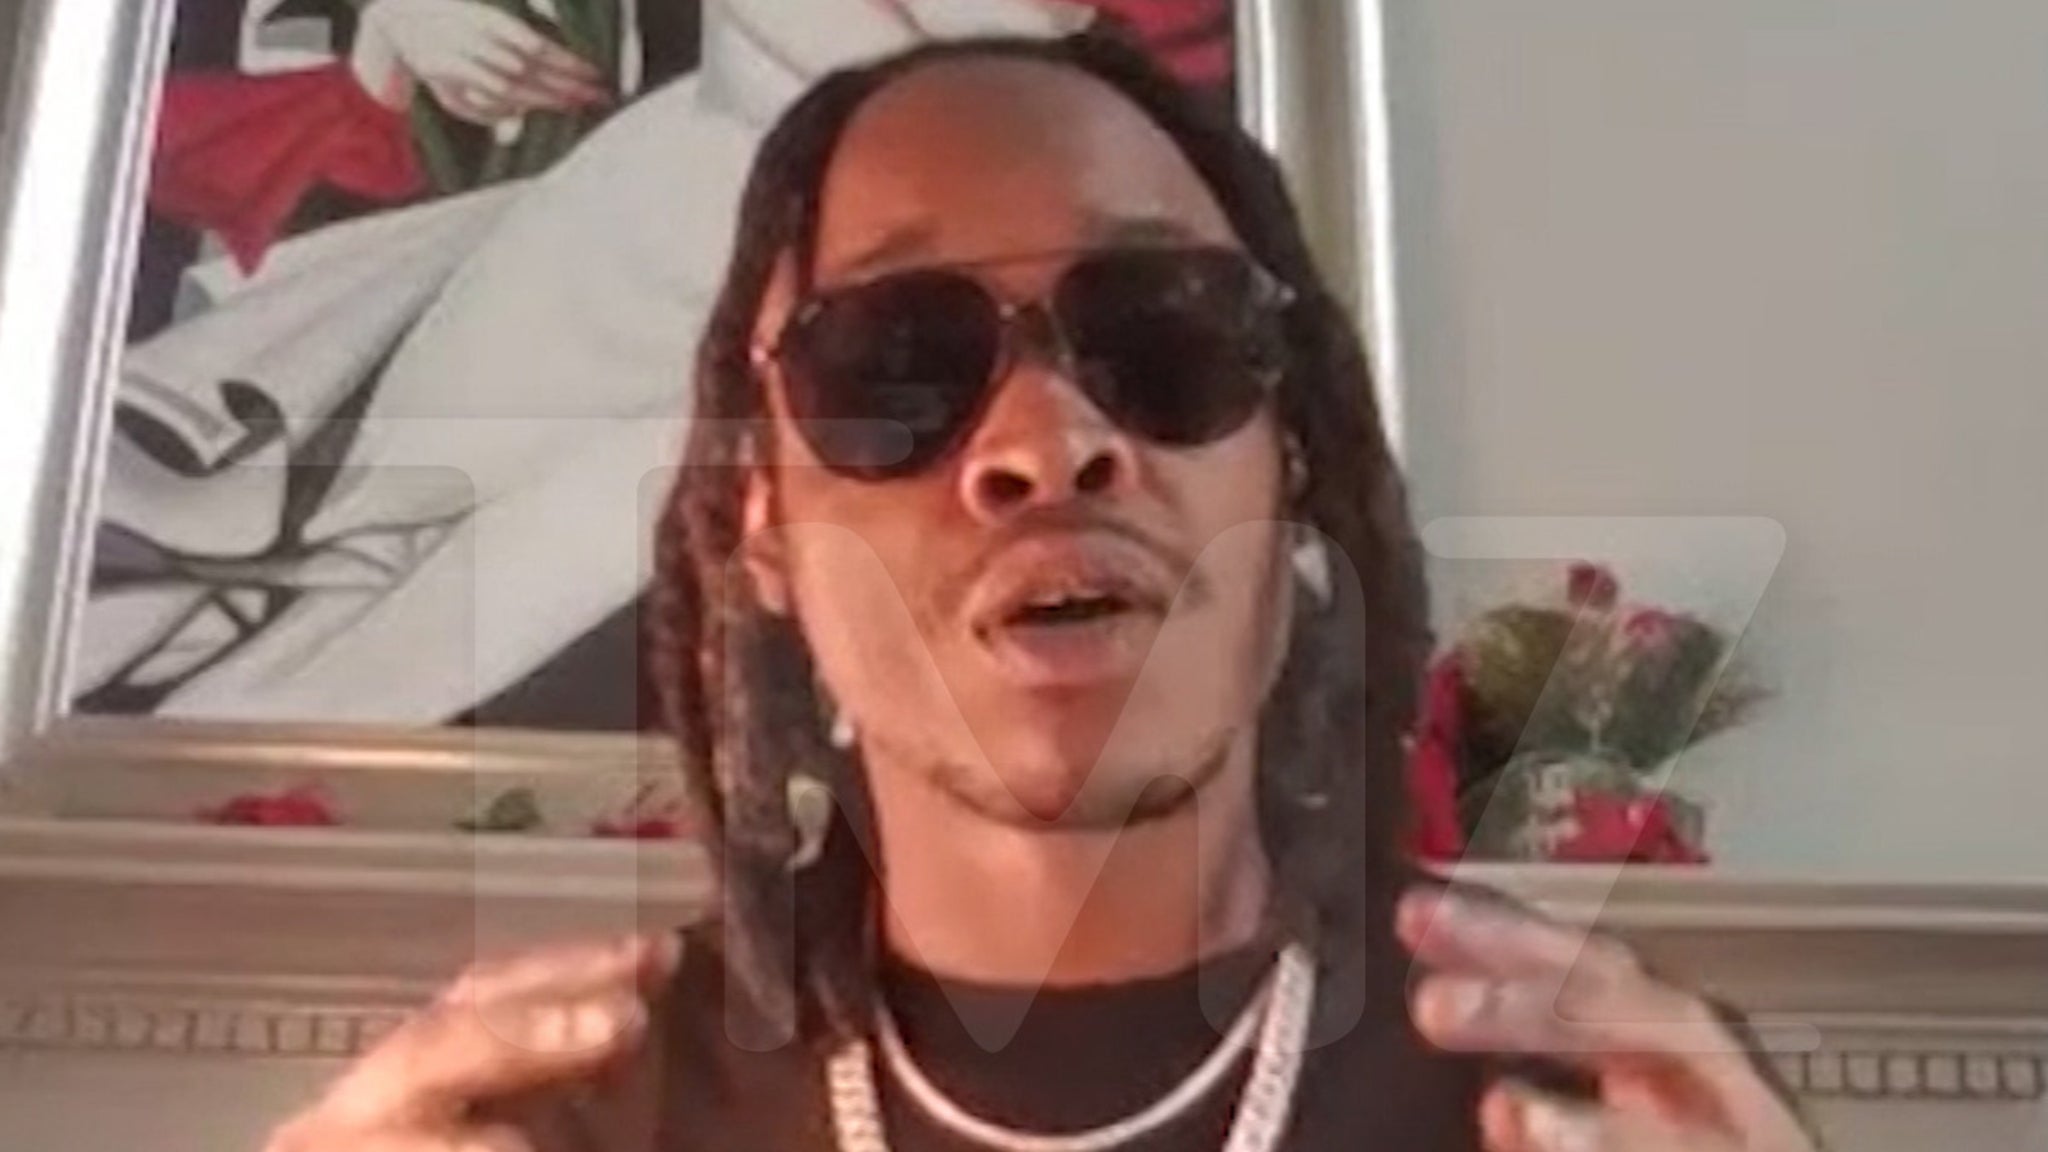 Hurricane Chris Sets Up Lawsuit Against Police After Murder Acquittal, Missed 'Snowfall' Hearing